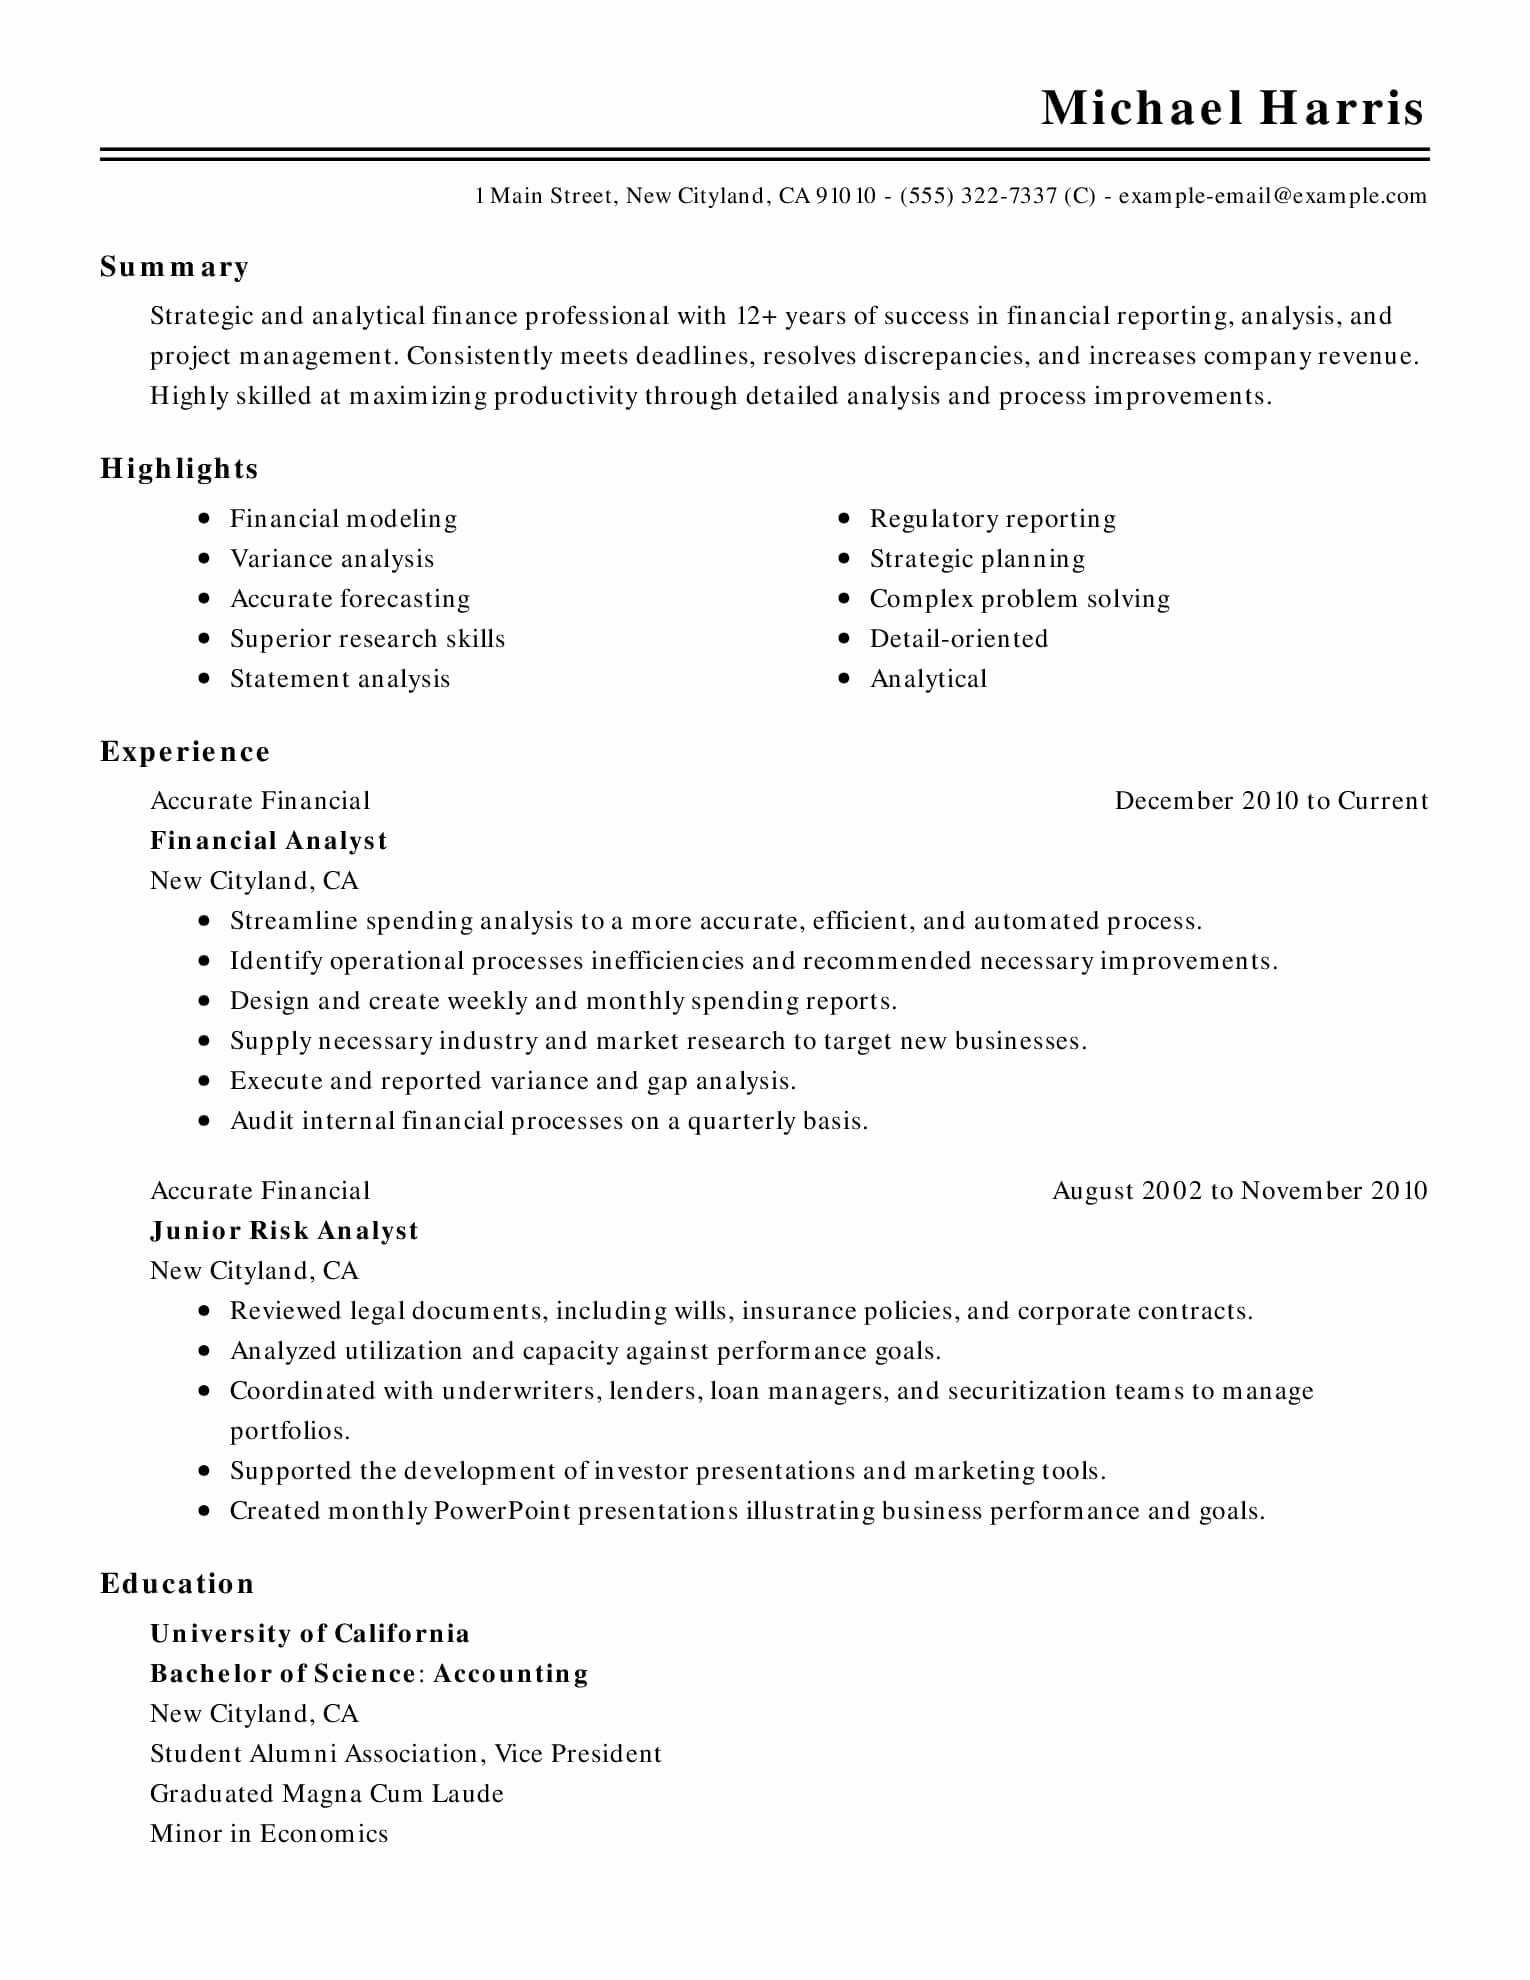 Sample Resumes In Word Elegant 15 Of the Best Resume Templates for Microsoft Word Fice